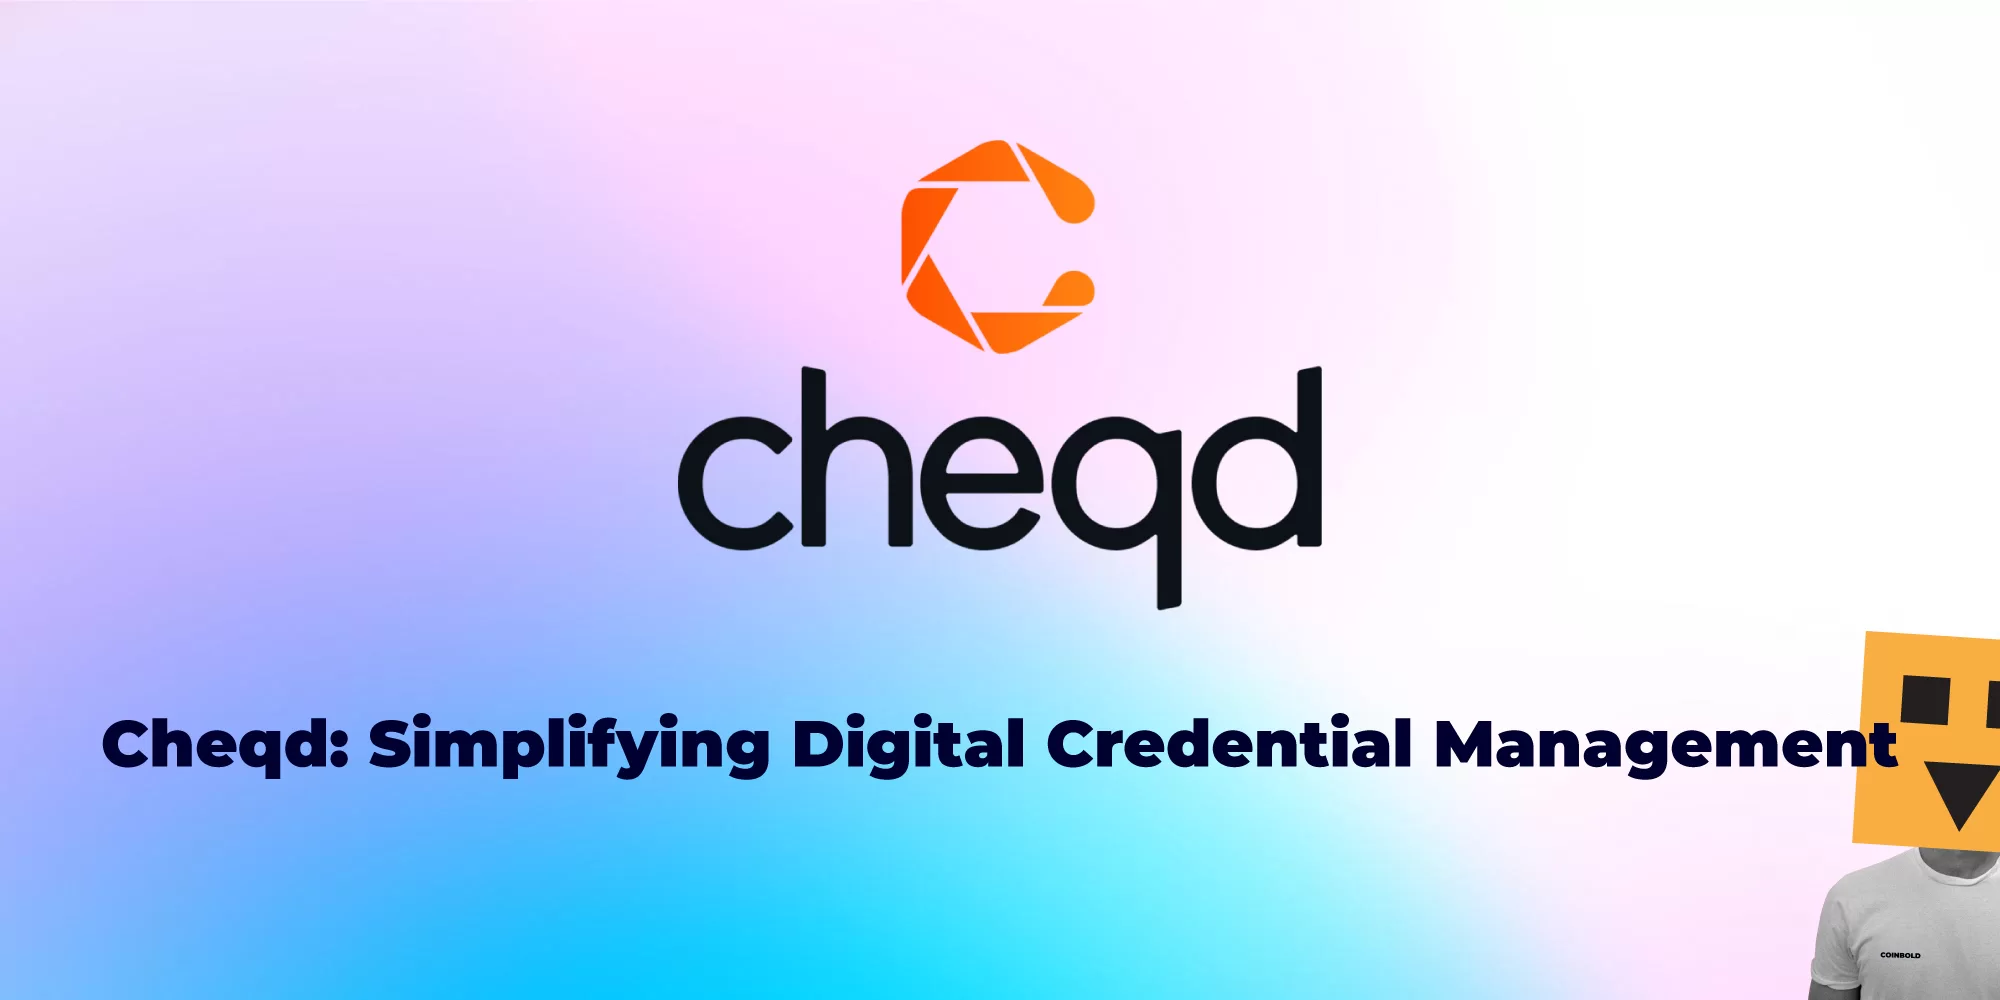 Cheqd: Simplifying Digital Credential Management